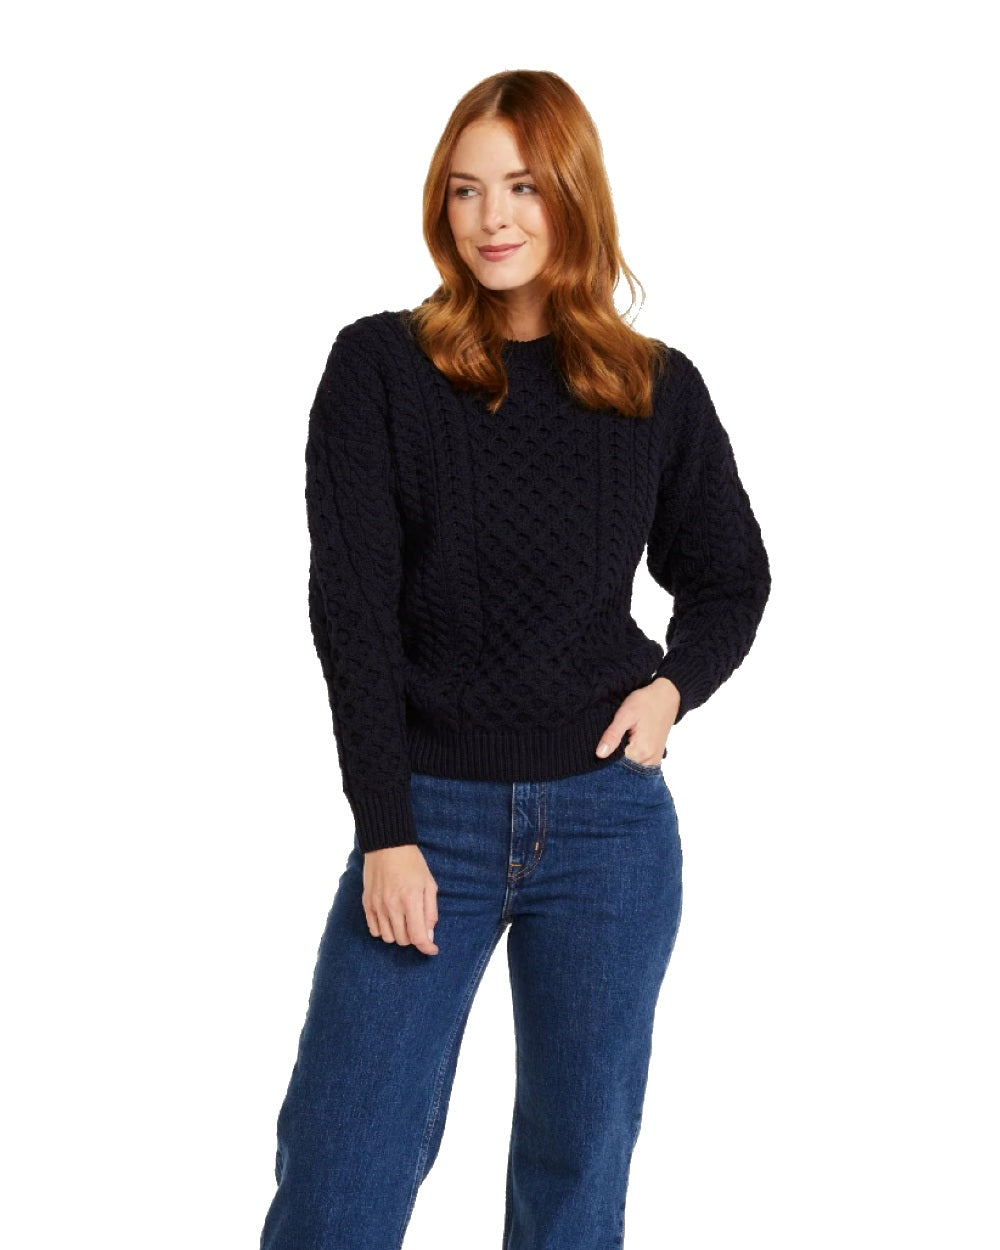 Aran Inisheer Traditional Sweater in Navy 